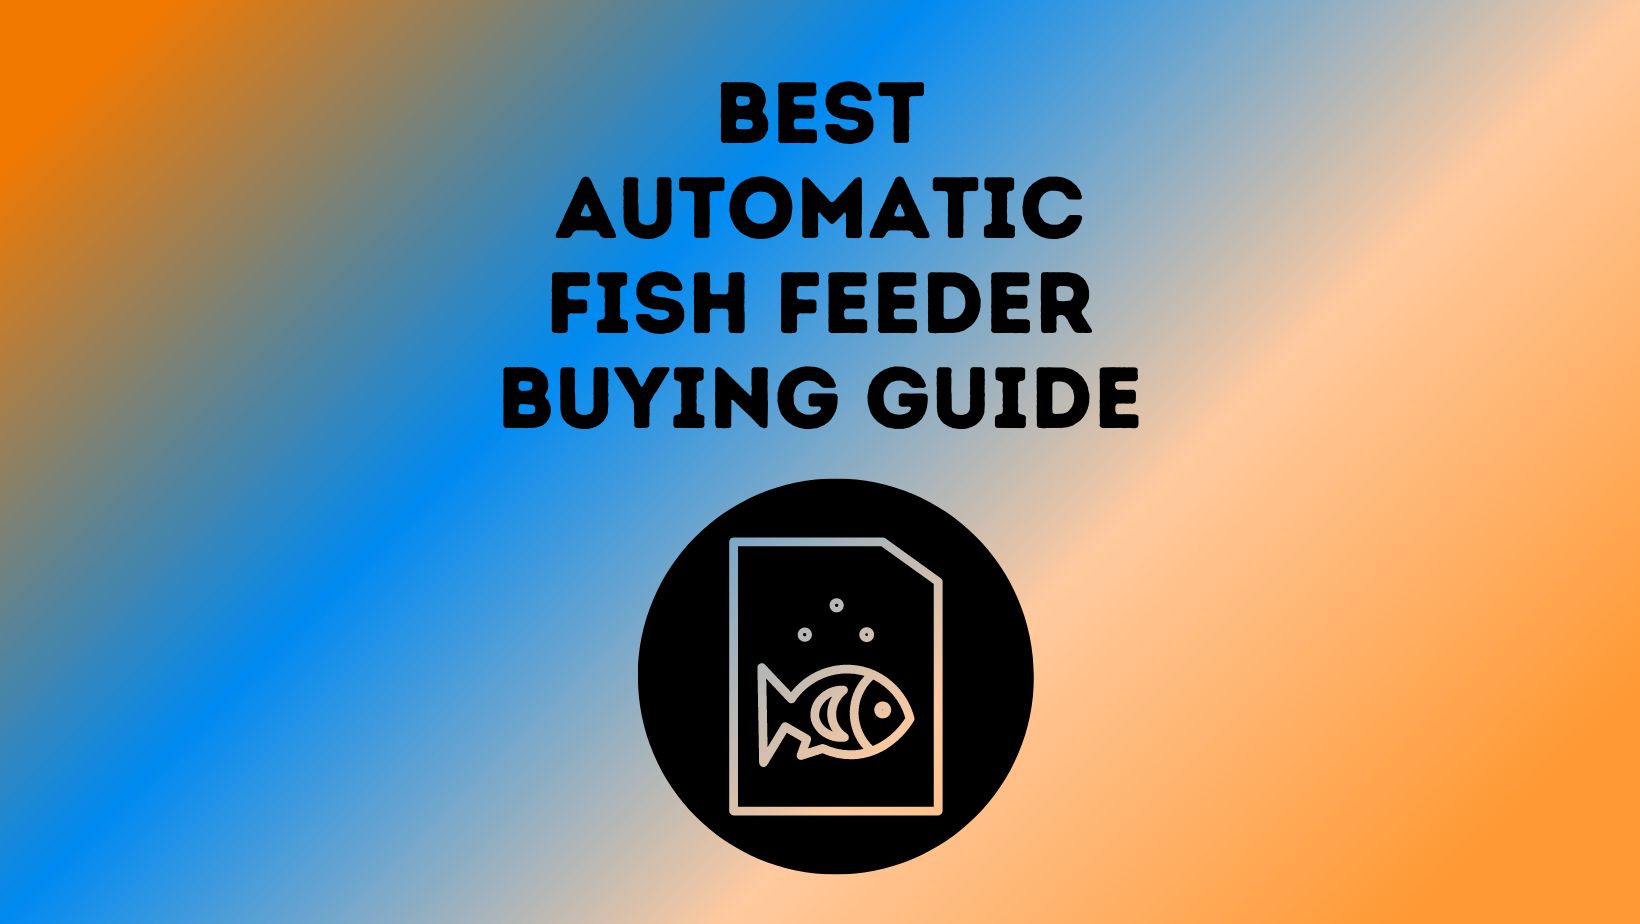 Best Automatic Fish Feeder Buying Guide